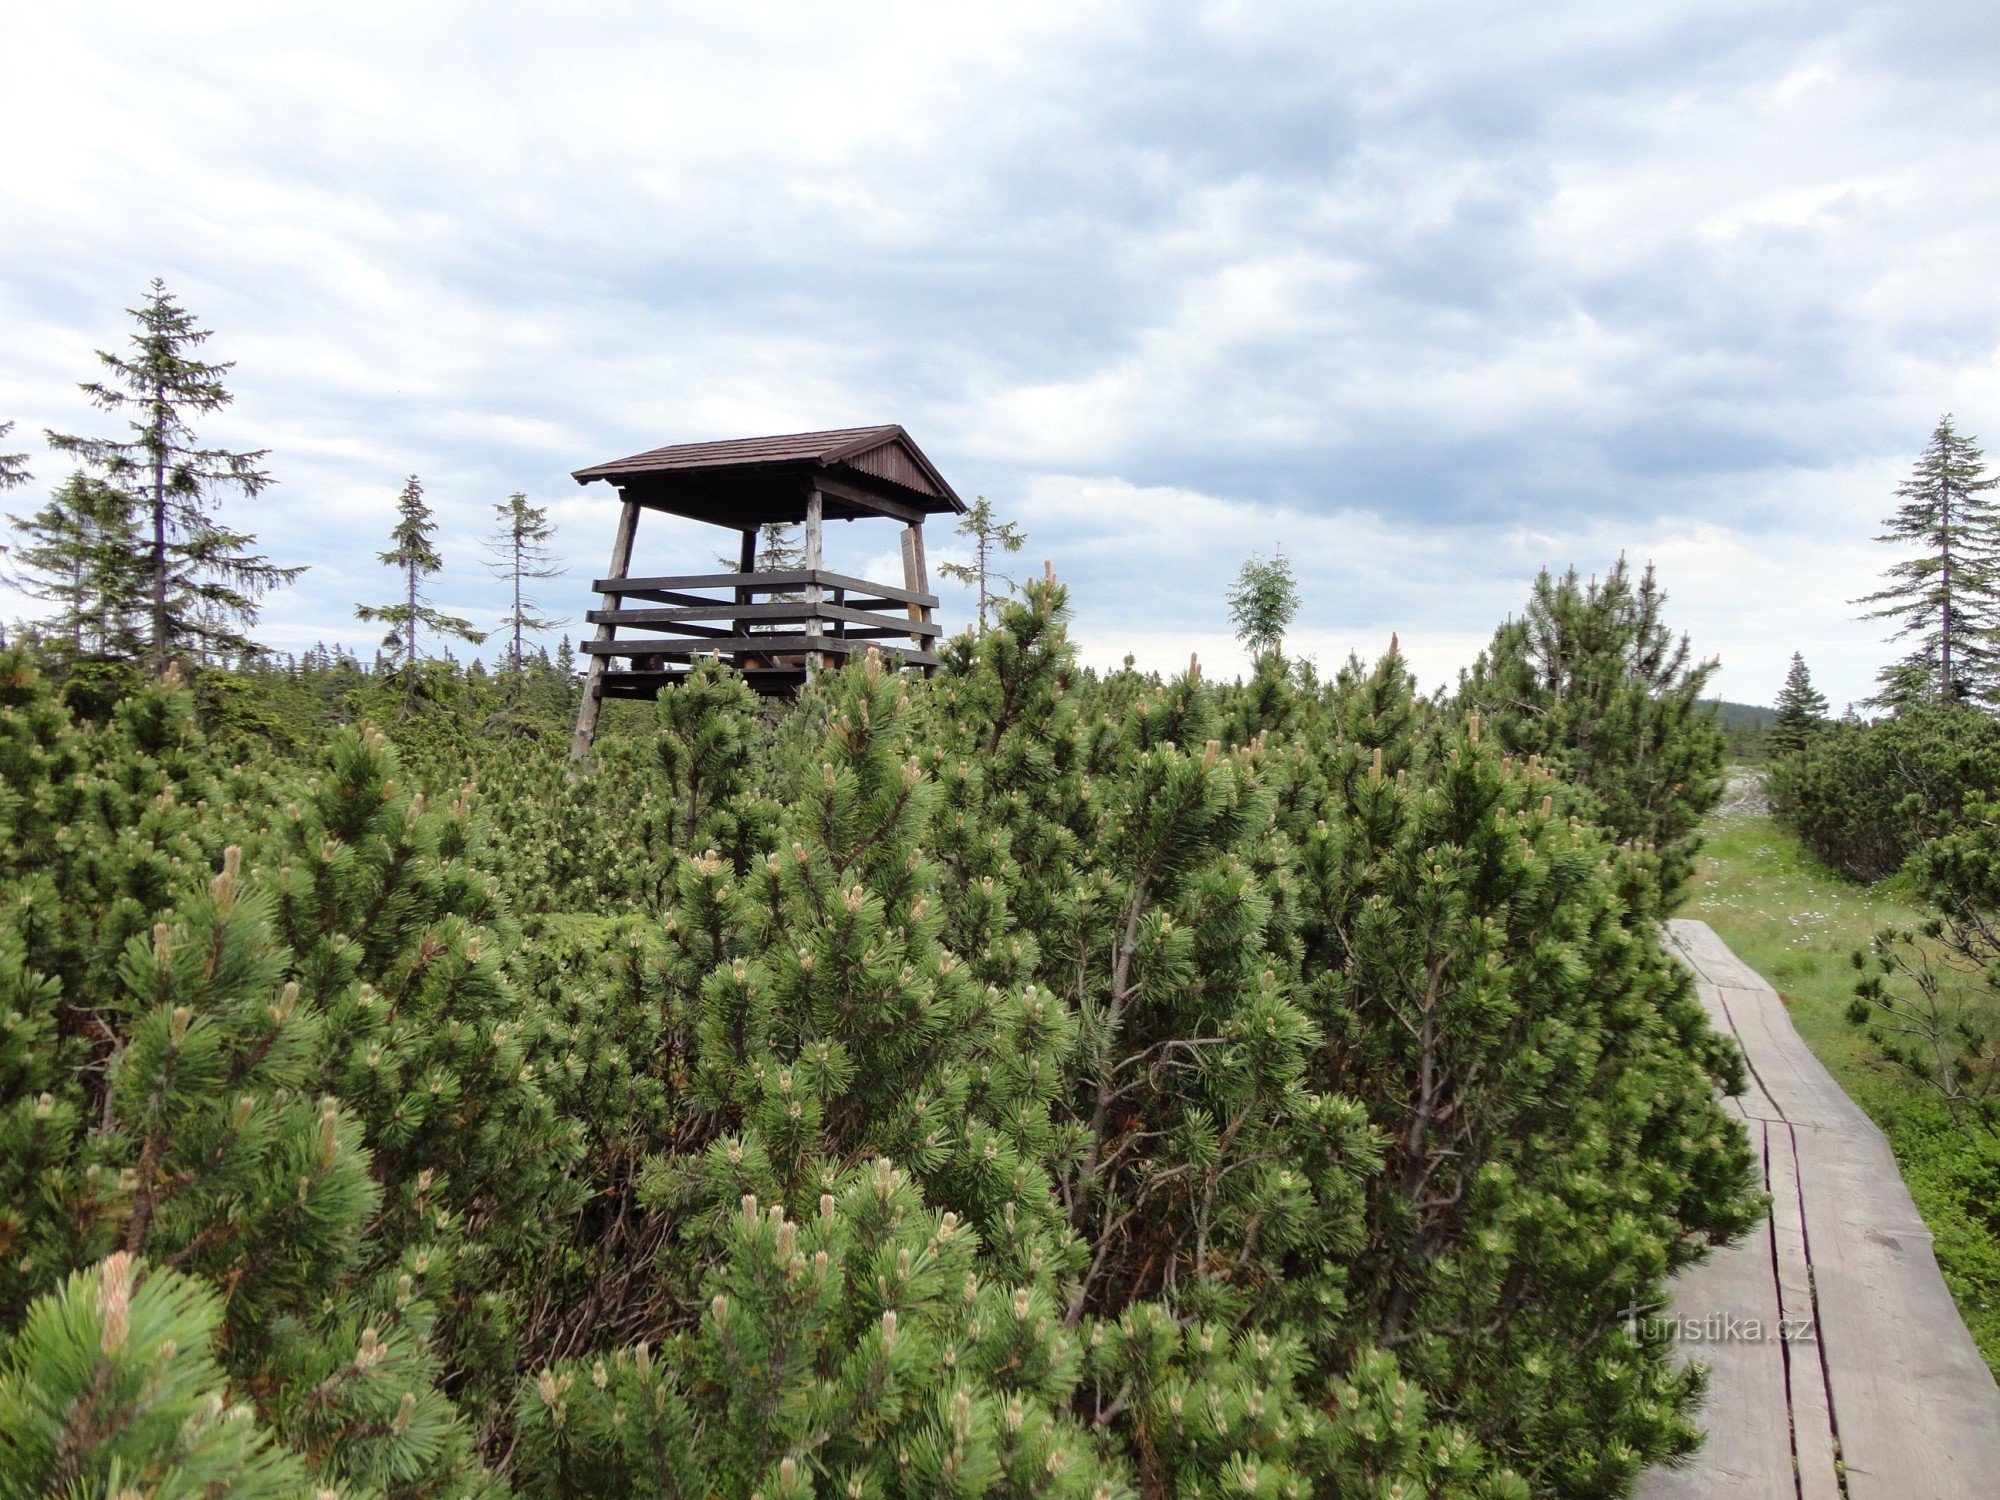 Lookout tower on the Montenegrin peatland